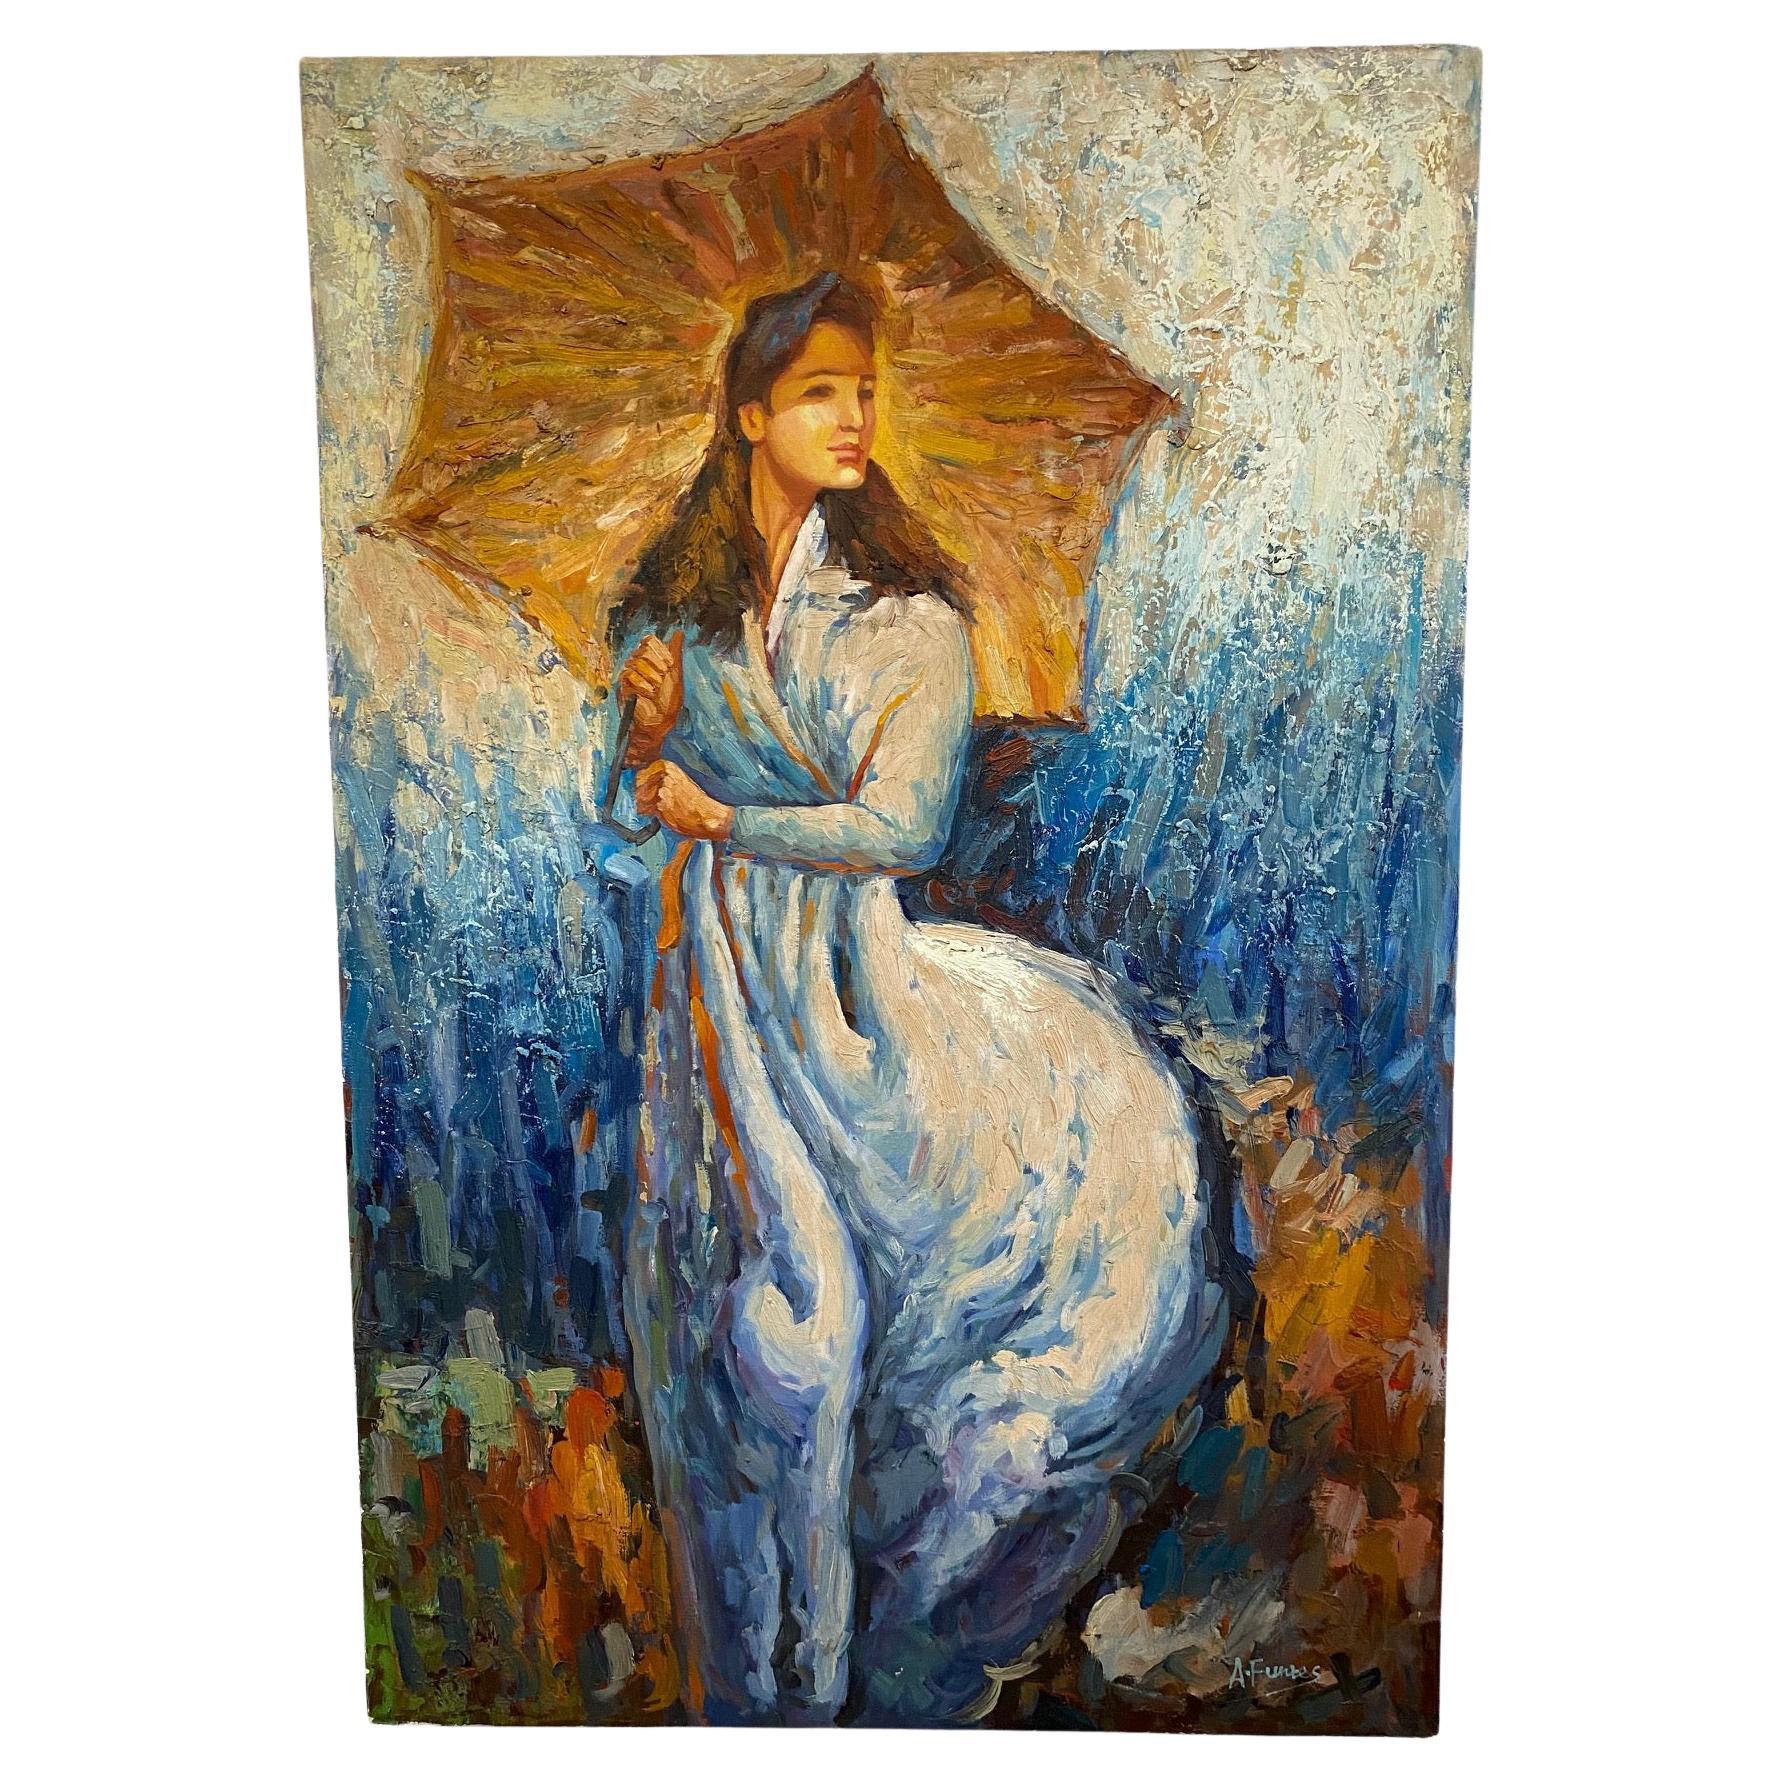 Vintage Oil Painting Woman Holding an Umbrella, Artist A. Funtes